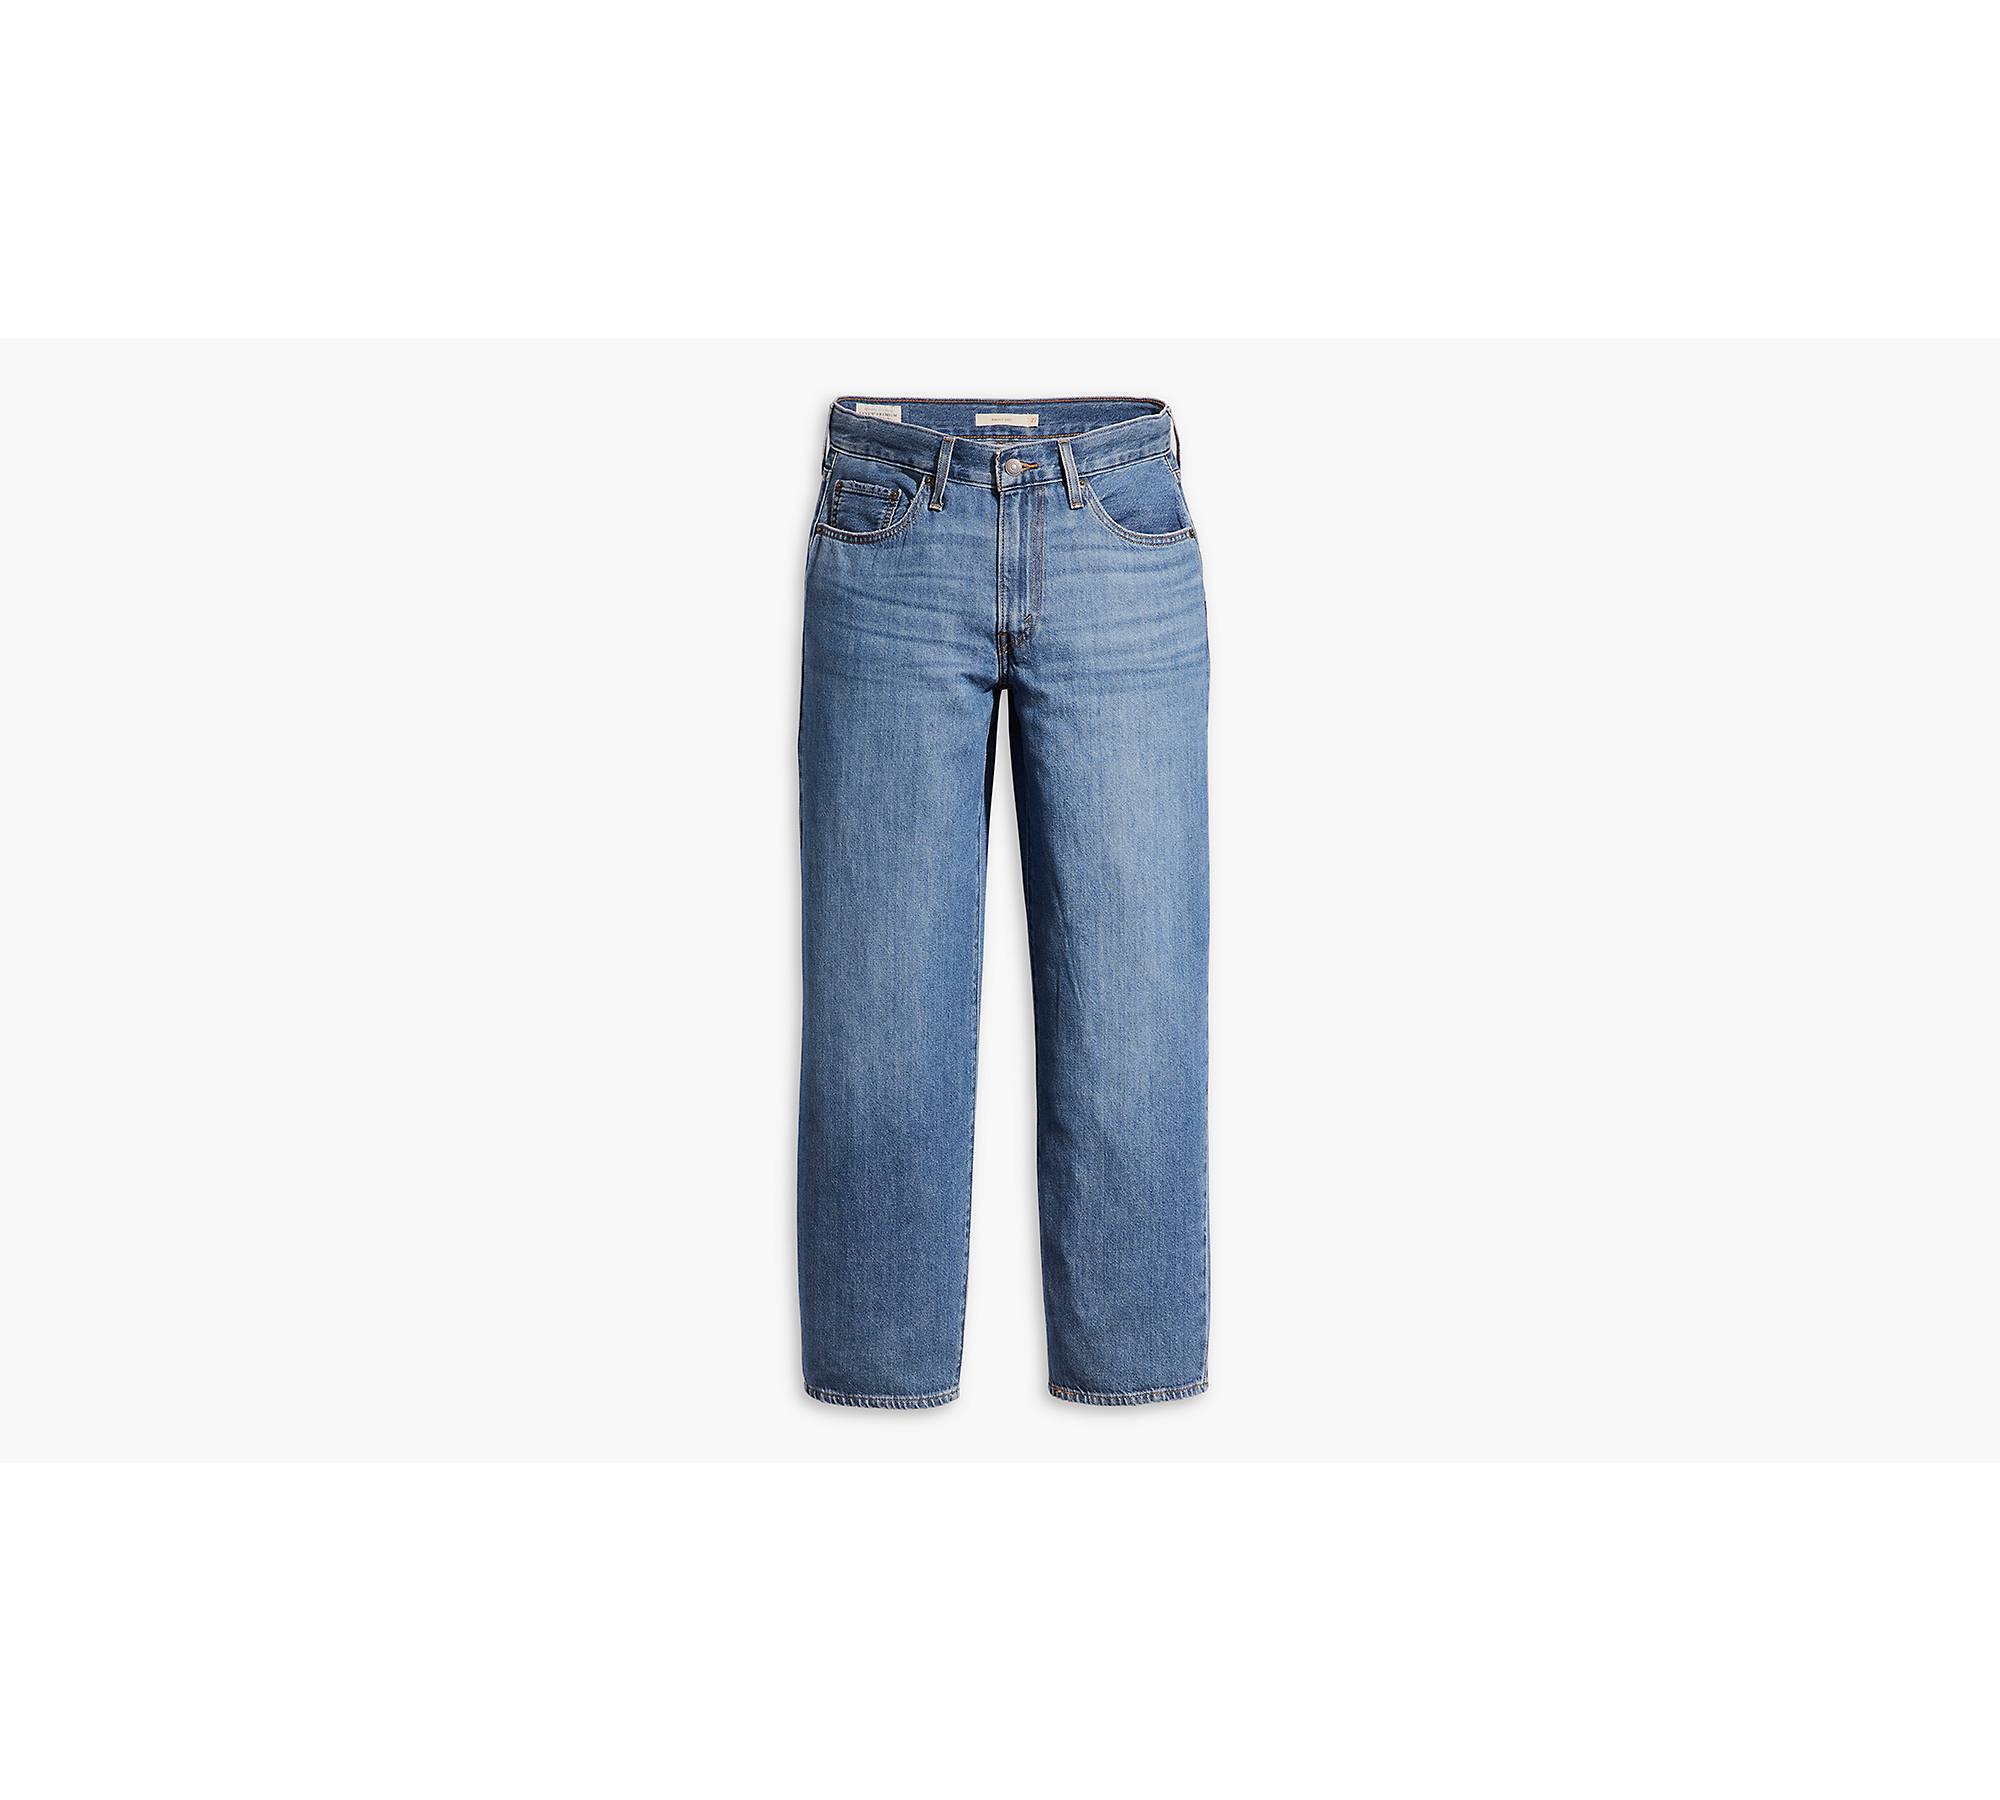 Boyfriend Style Baggy Cuffed Jeans High Rise Dad Jeans